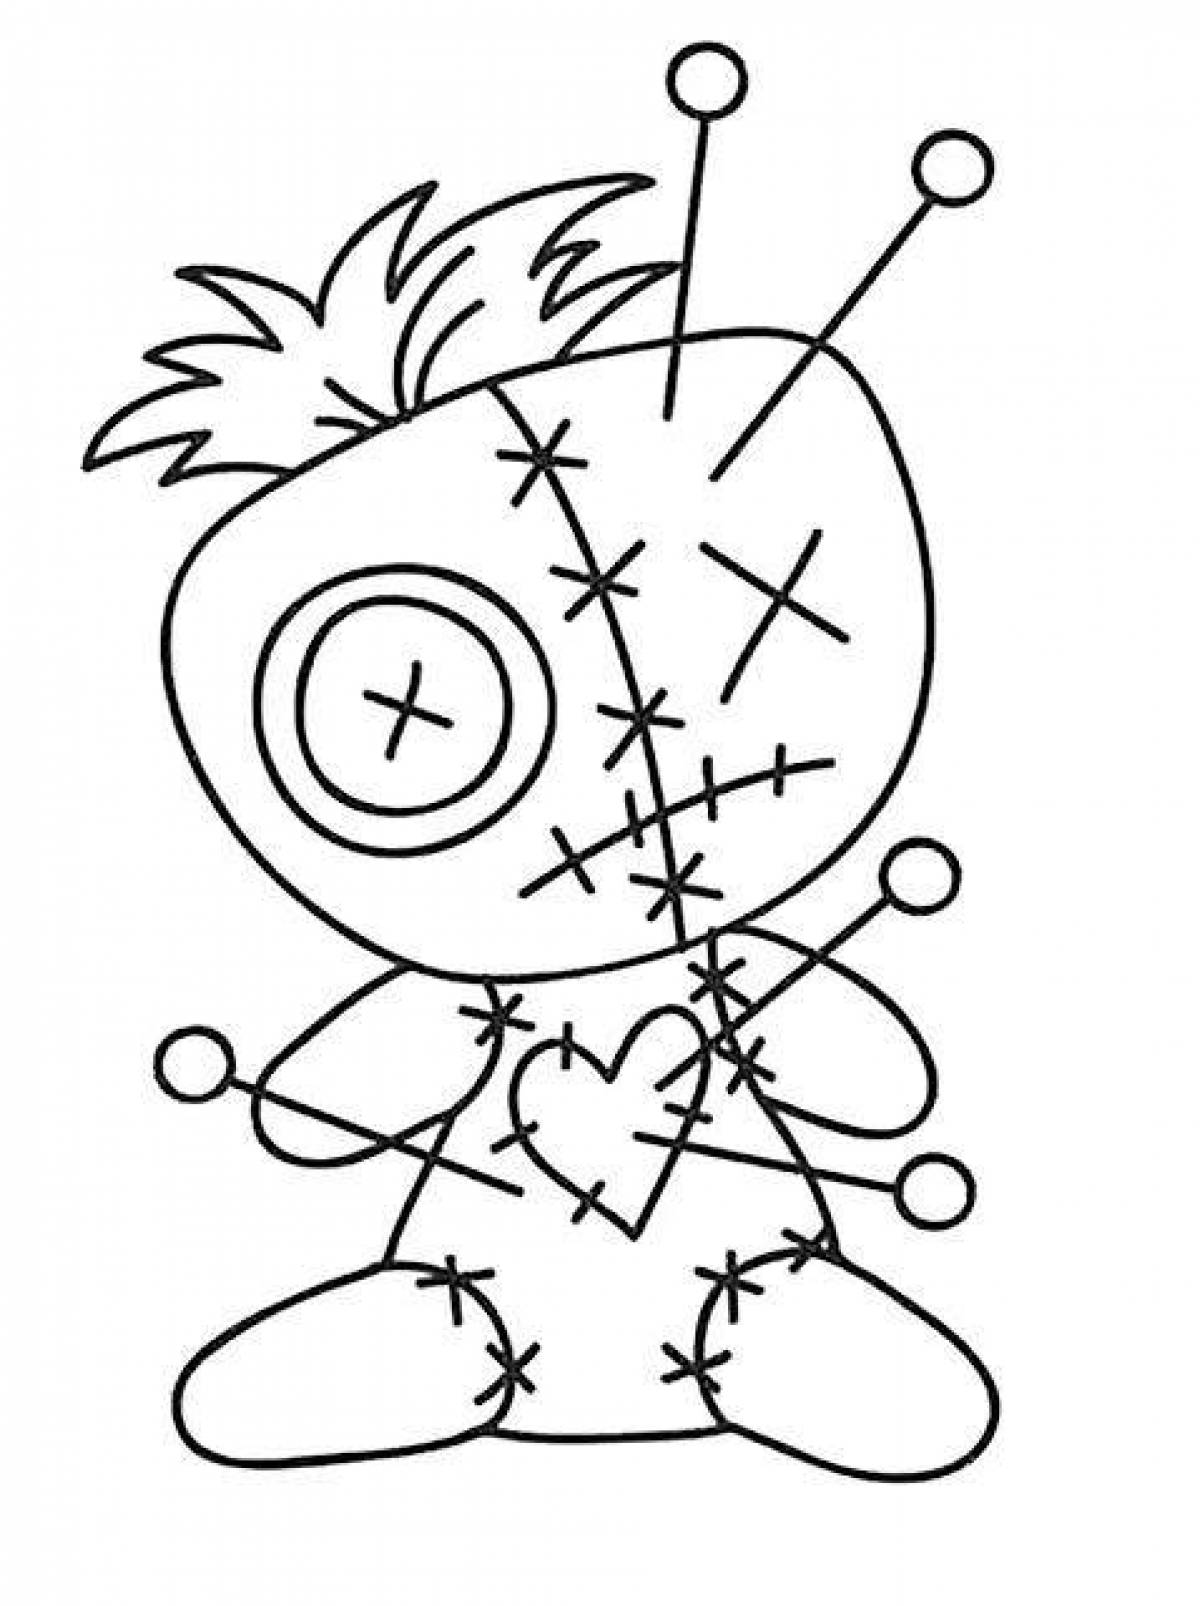 Fancy voodoo doll coloring page